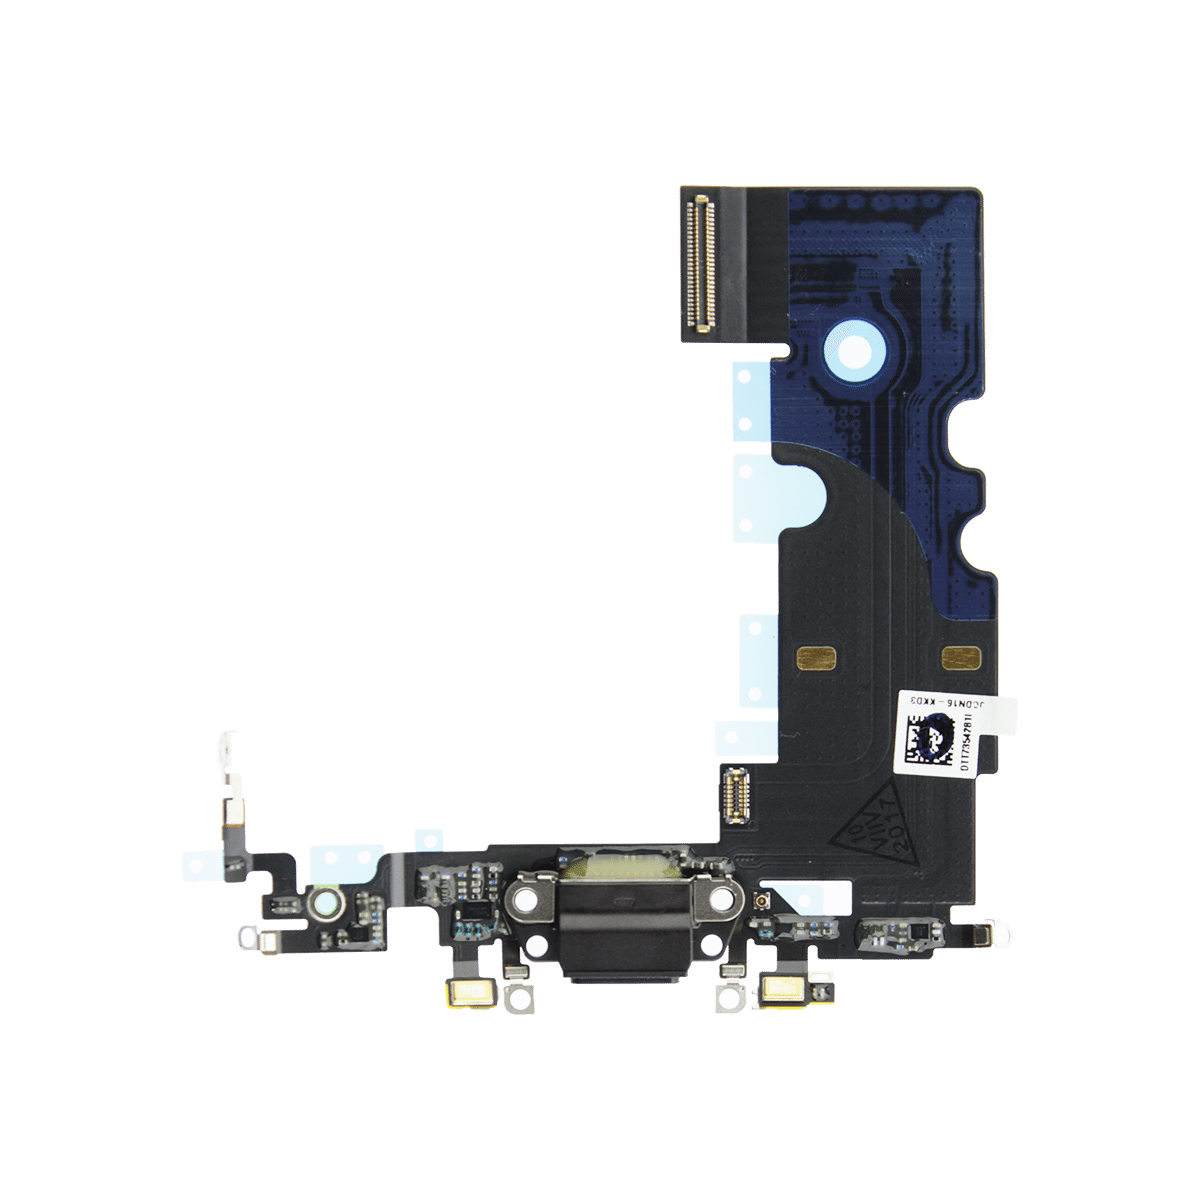 iPhone 8 / SE (2020) Charging Dock Port Assembly Replacement